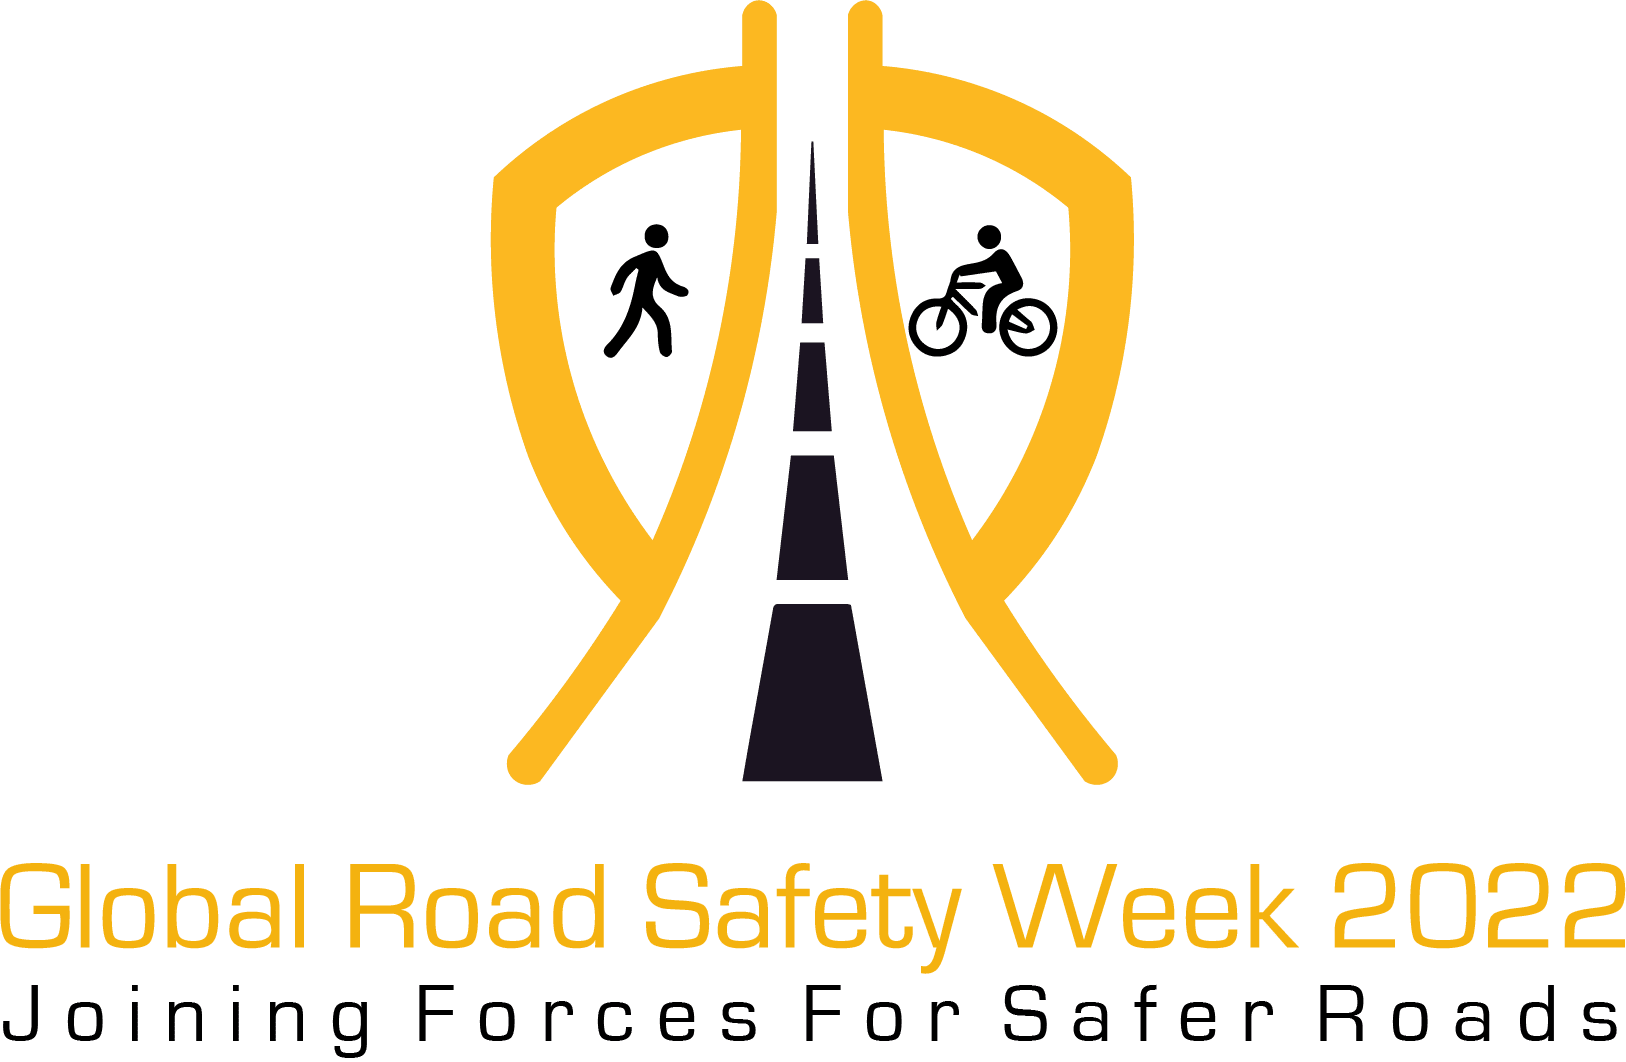 Ways to stay safe on the roads as a pedestrian - Saferoads